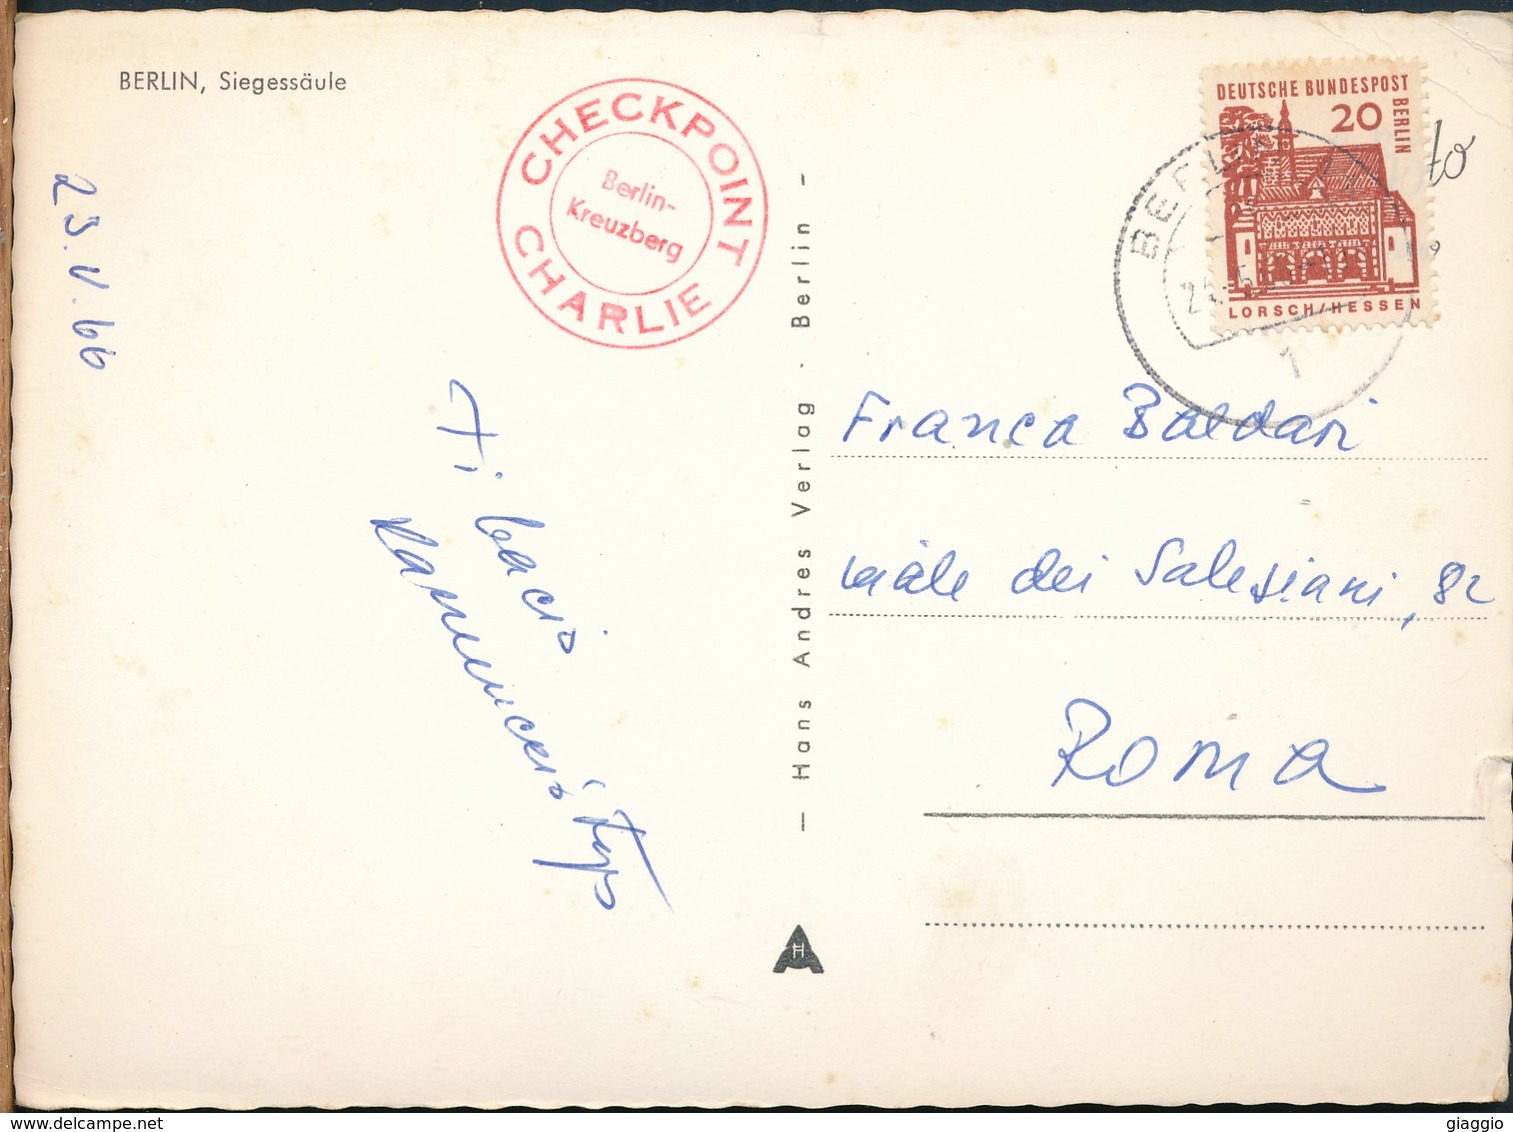 °°° 17399 - GERMANY - BERLIN - SIEGESSAULE - 1966 With Stamps - CHECPOINT CHARLIE °°° - Kreuzberg